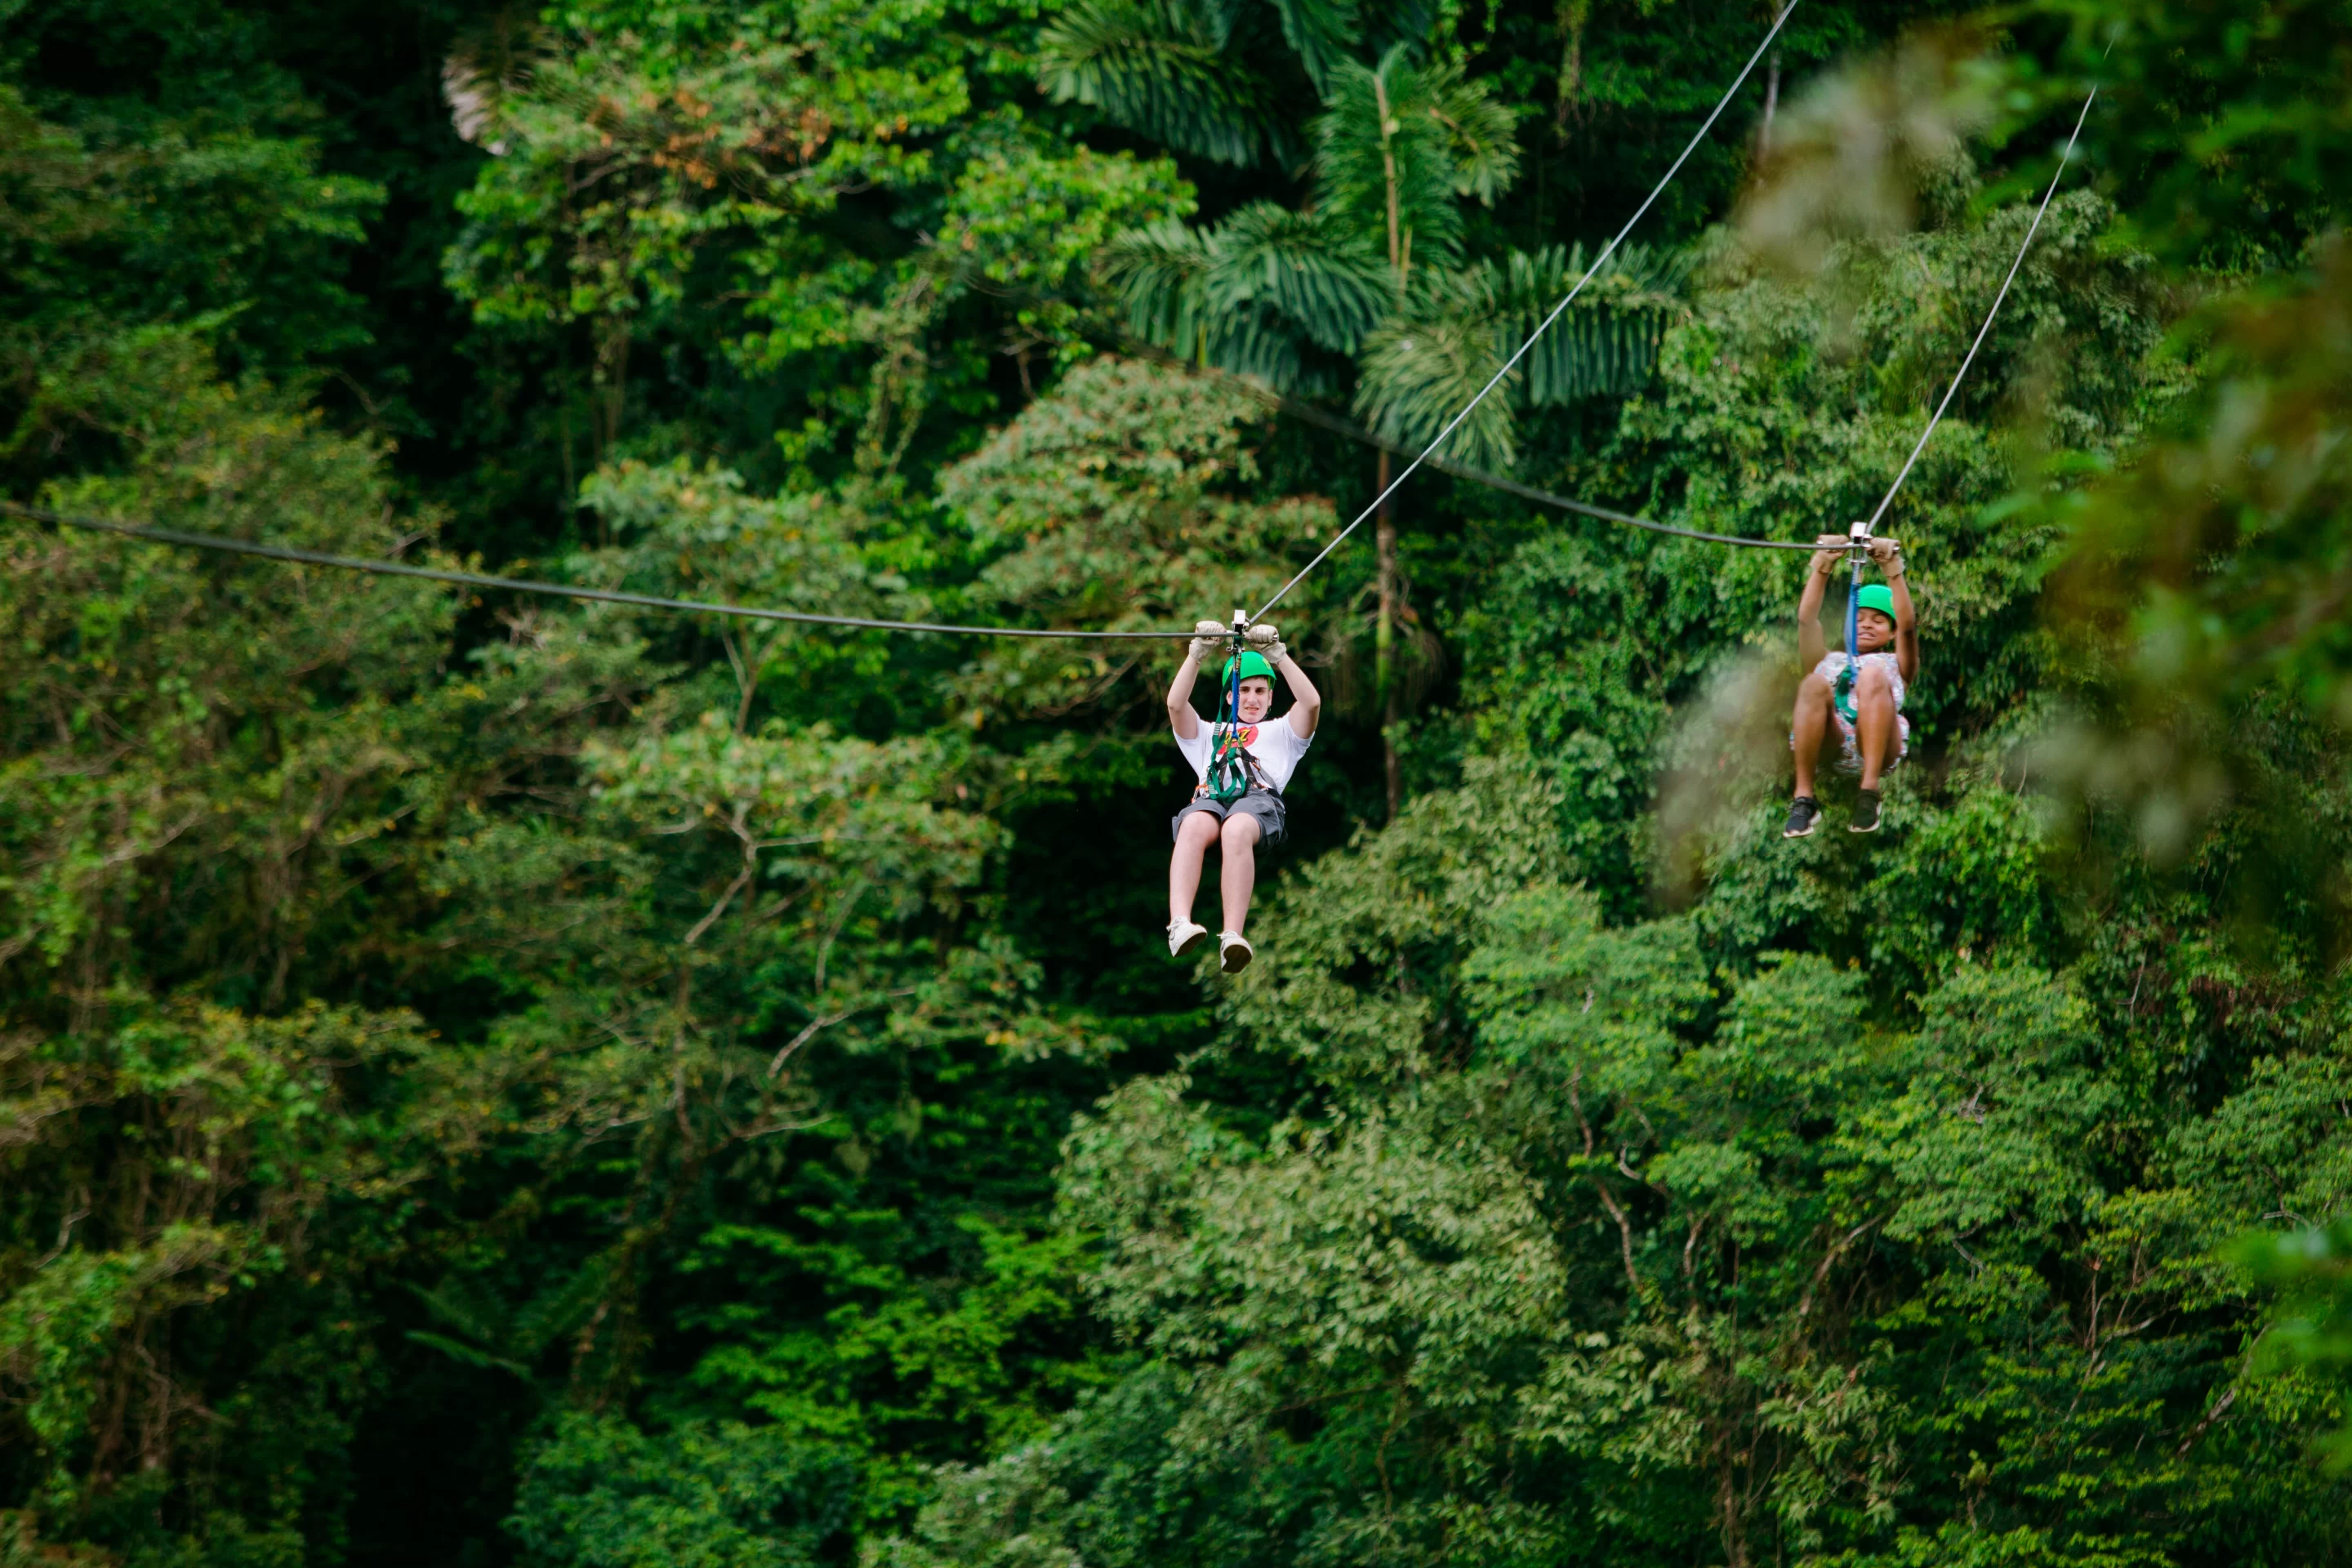 Experience the diverse wildlife and lush vegetation by ziplining through the rainforest canopy.